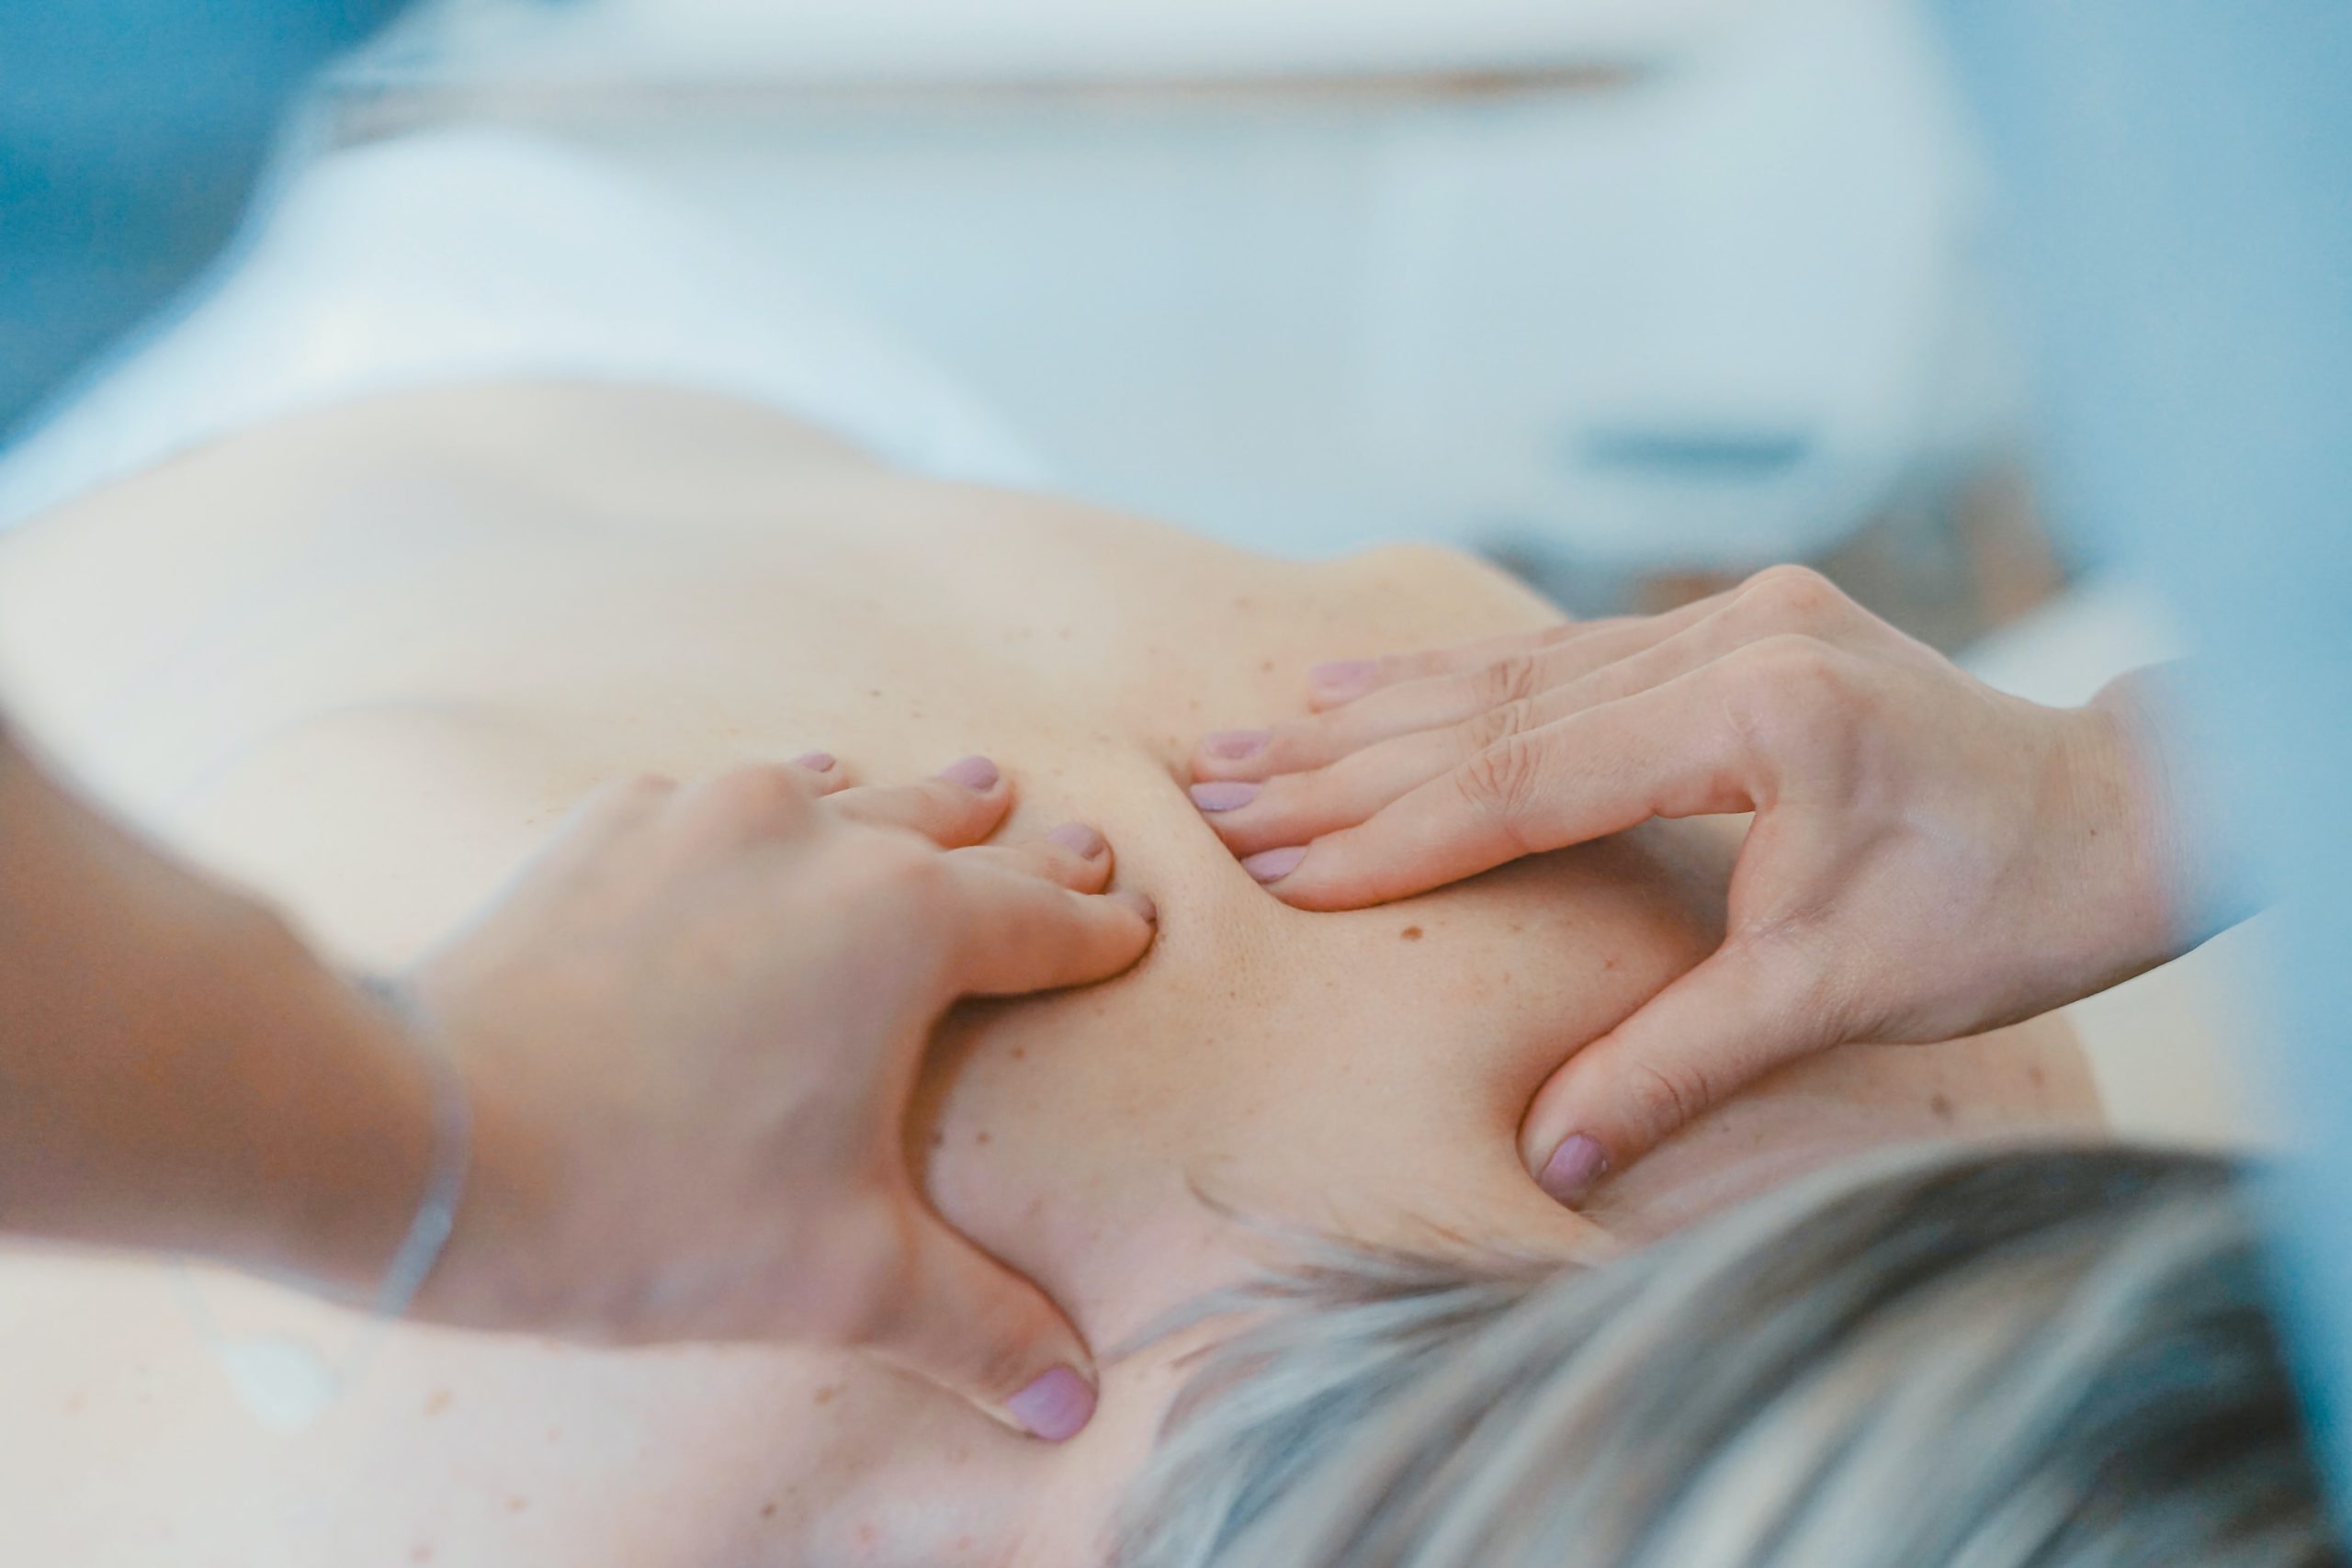 Deep tissue massages are one of the most popular spa treatments